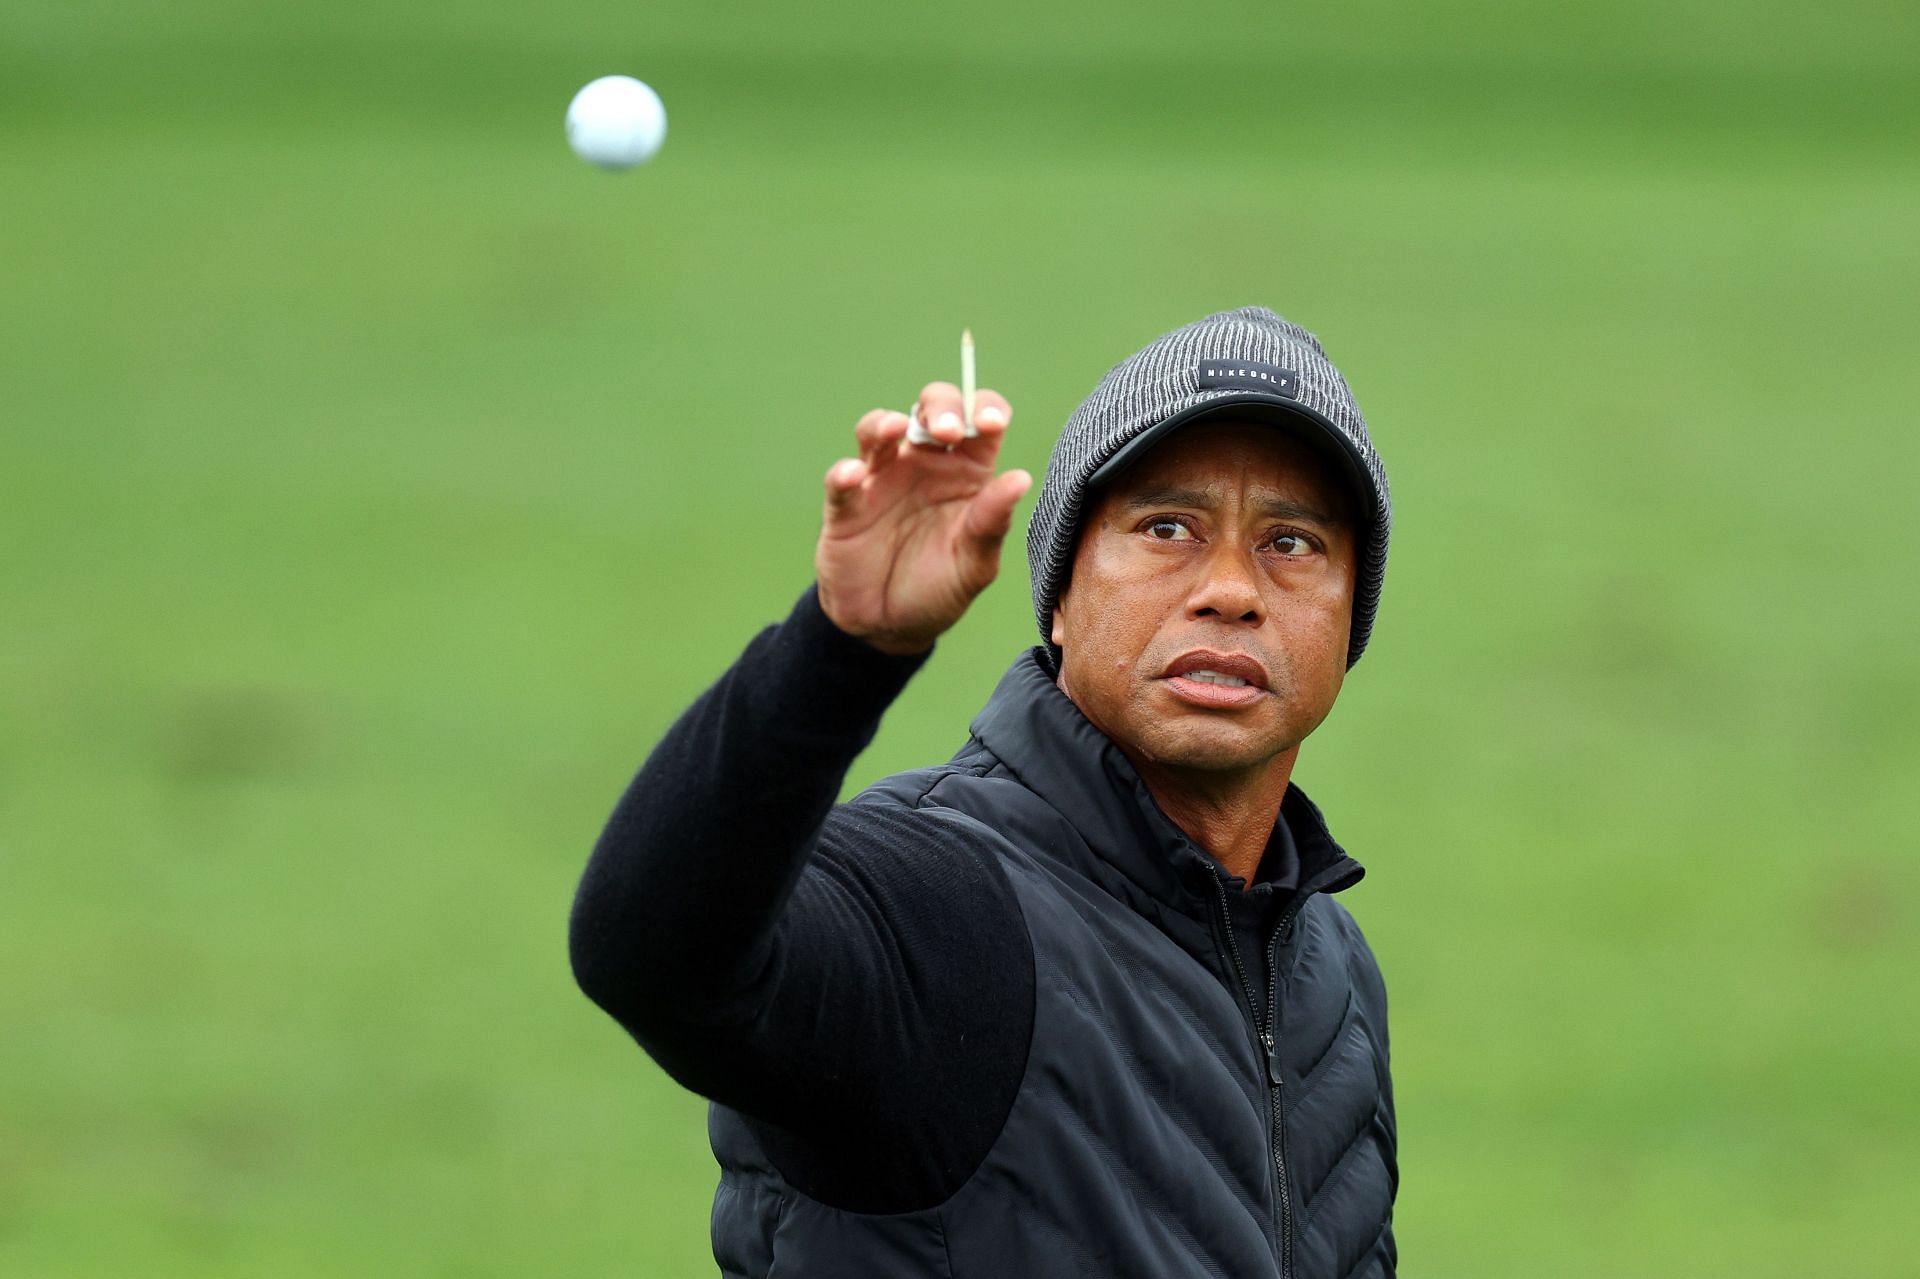 Tiger Woods is not retiring any time soon